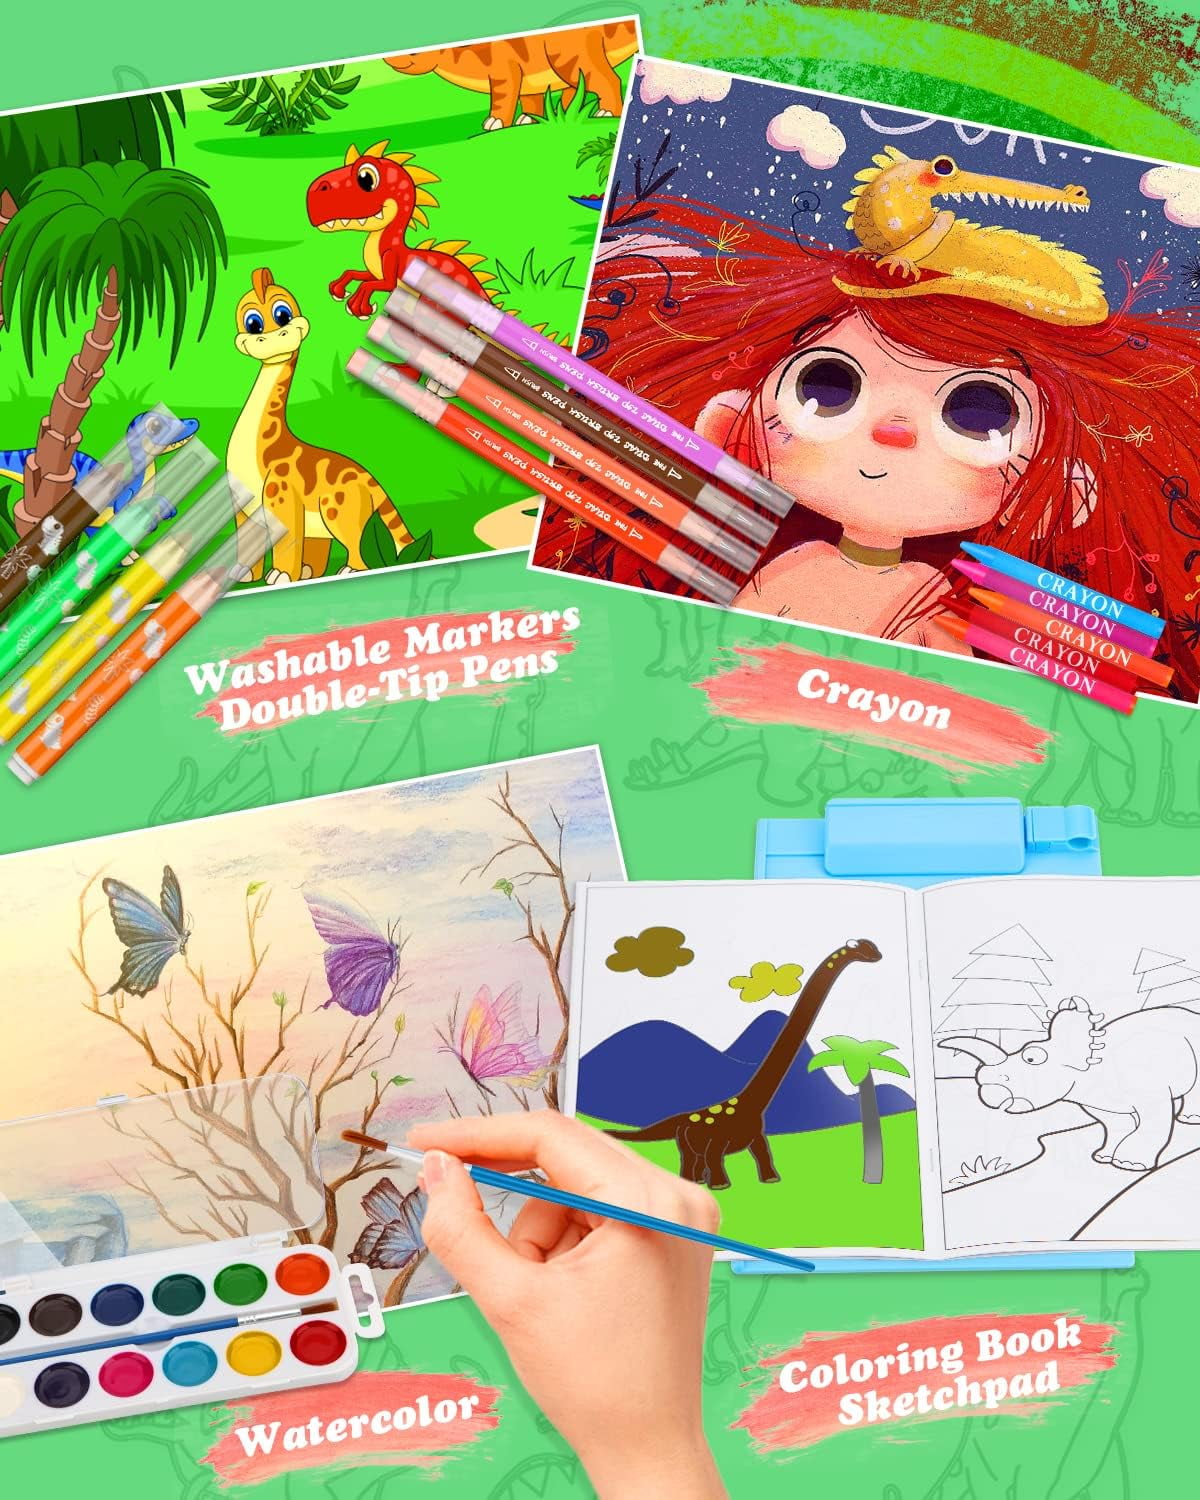 Exquisite Art Case Set - Painting, Drawing Art Kit with Markers, Dual-Tip  Pens, Watercolor, Crayon, Coloring Book, Sketch Pad - Dinosaur Toys Art